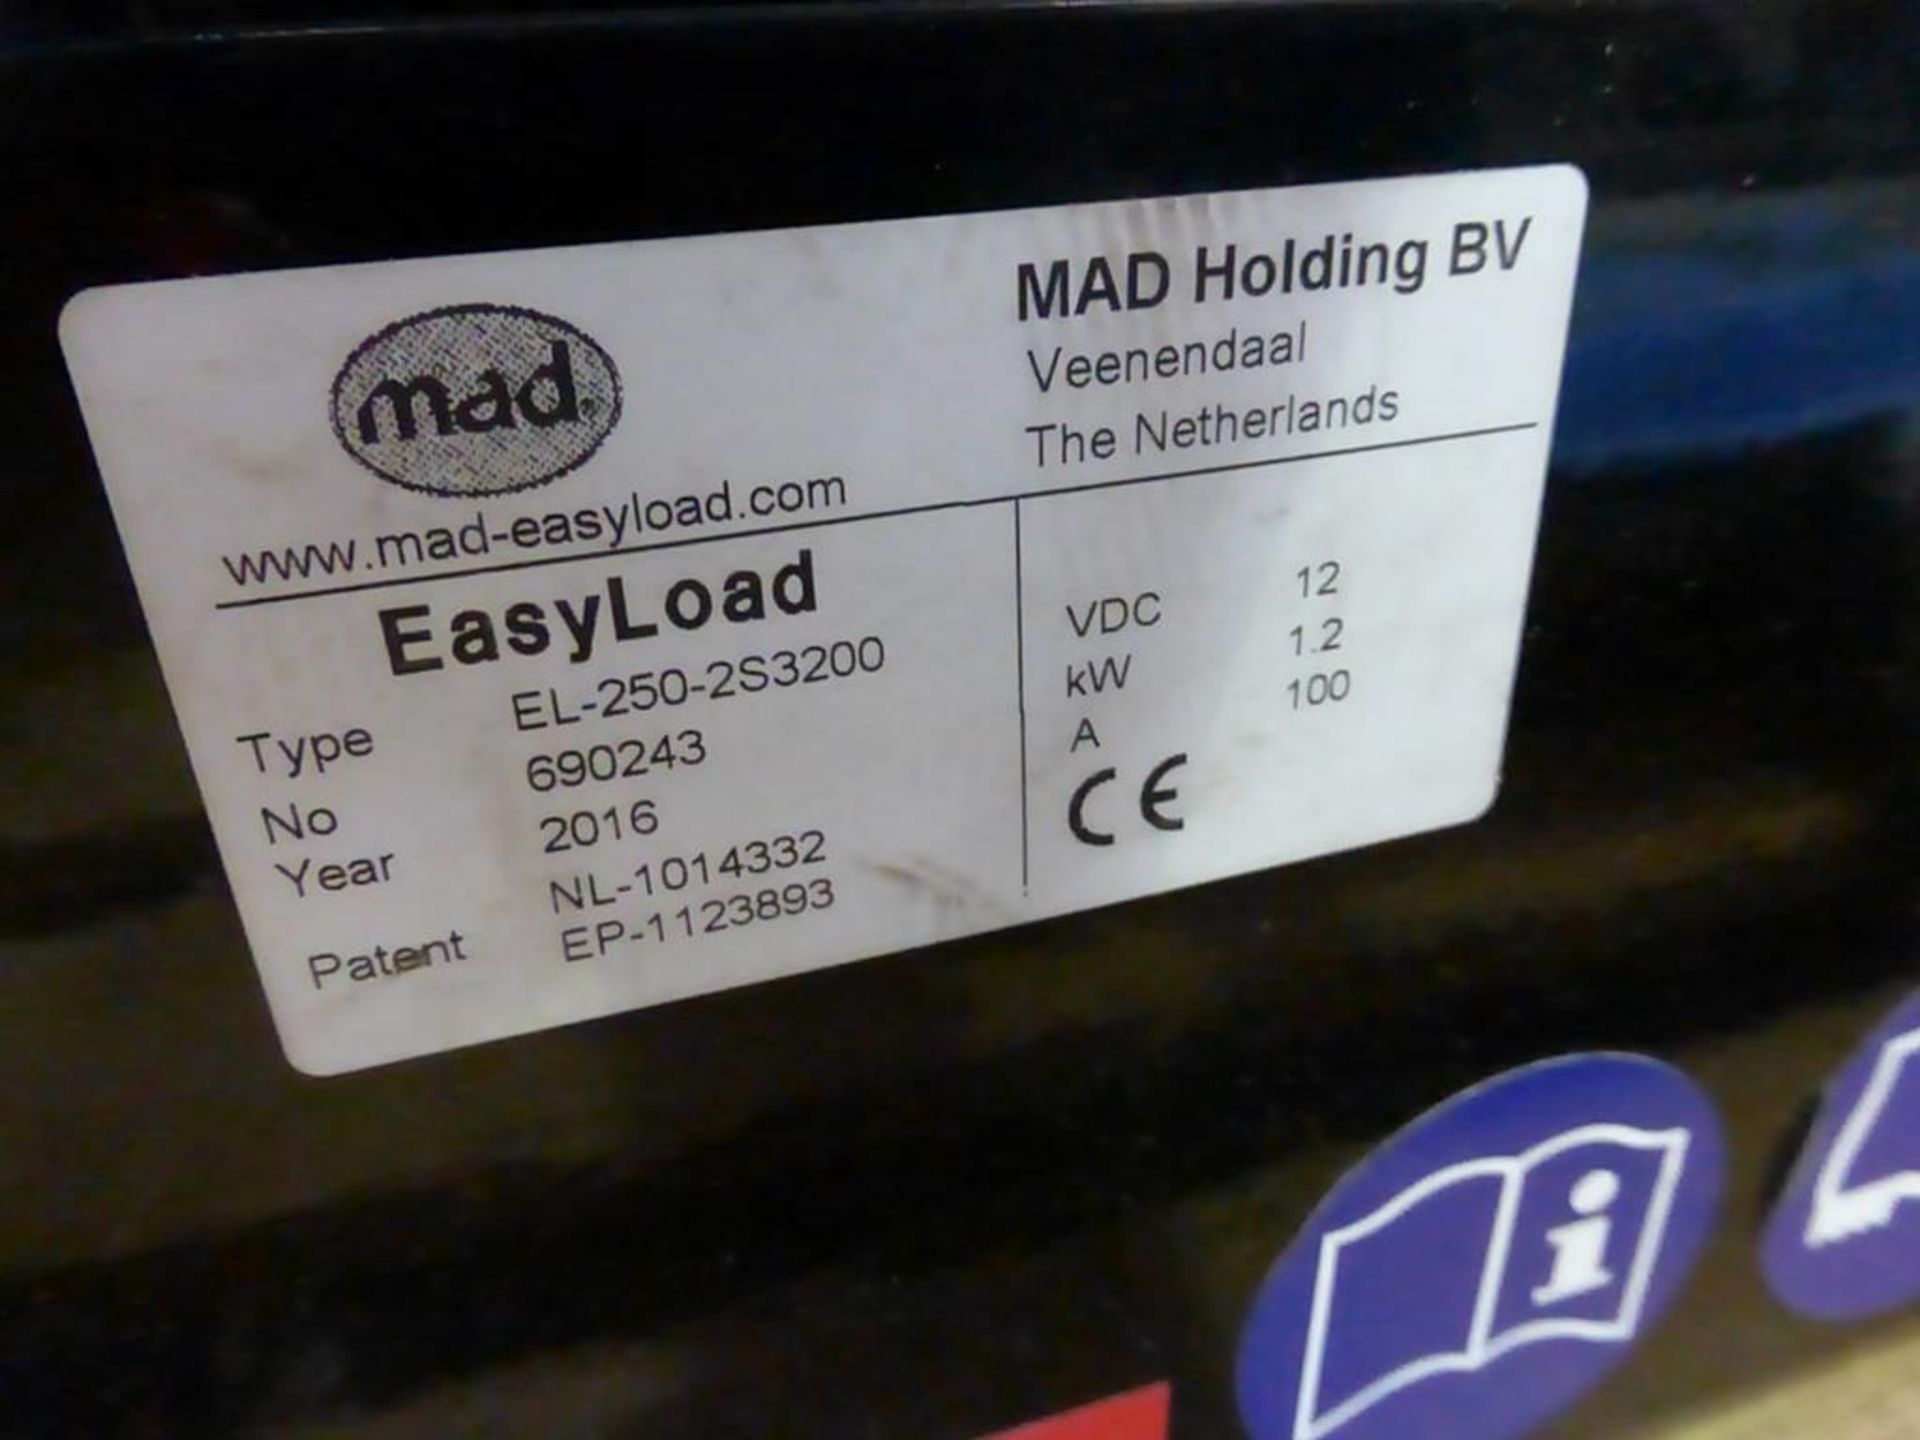 MAD Easy Load EL 250 253200 Loading System for light commercial vehicles YOM 2016; max lift capacity - Image 2 of 2